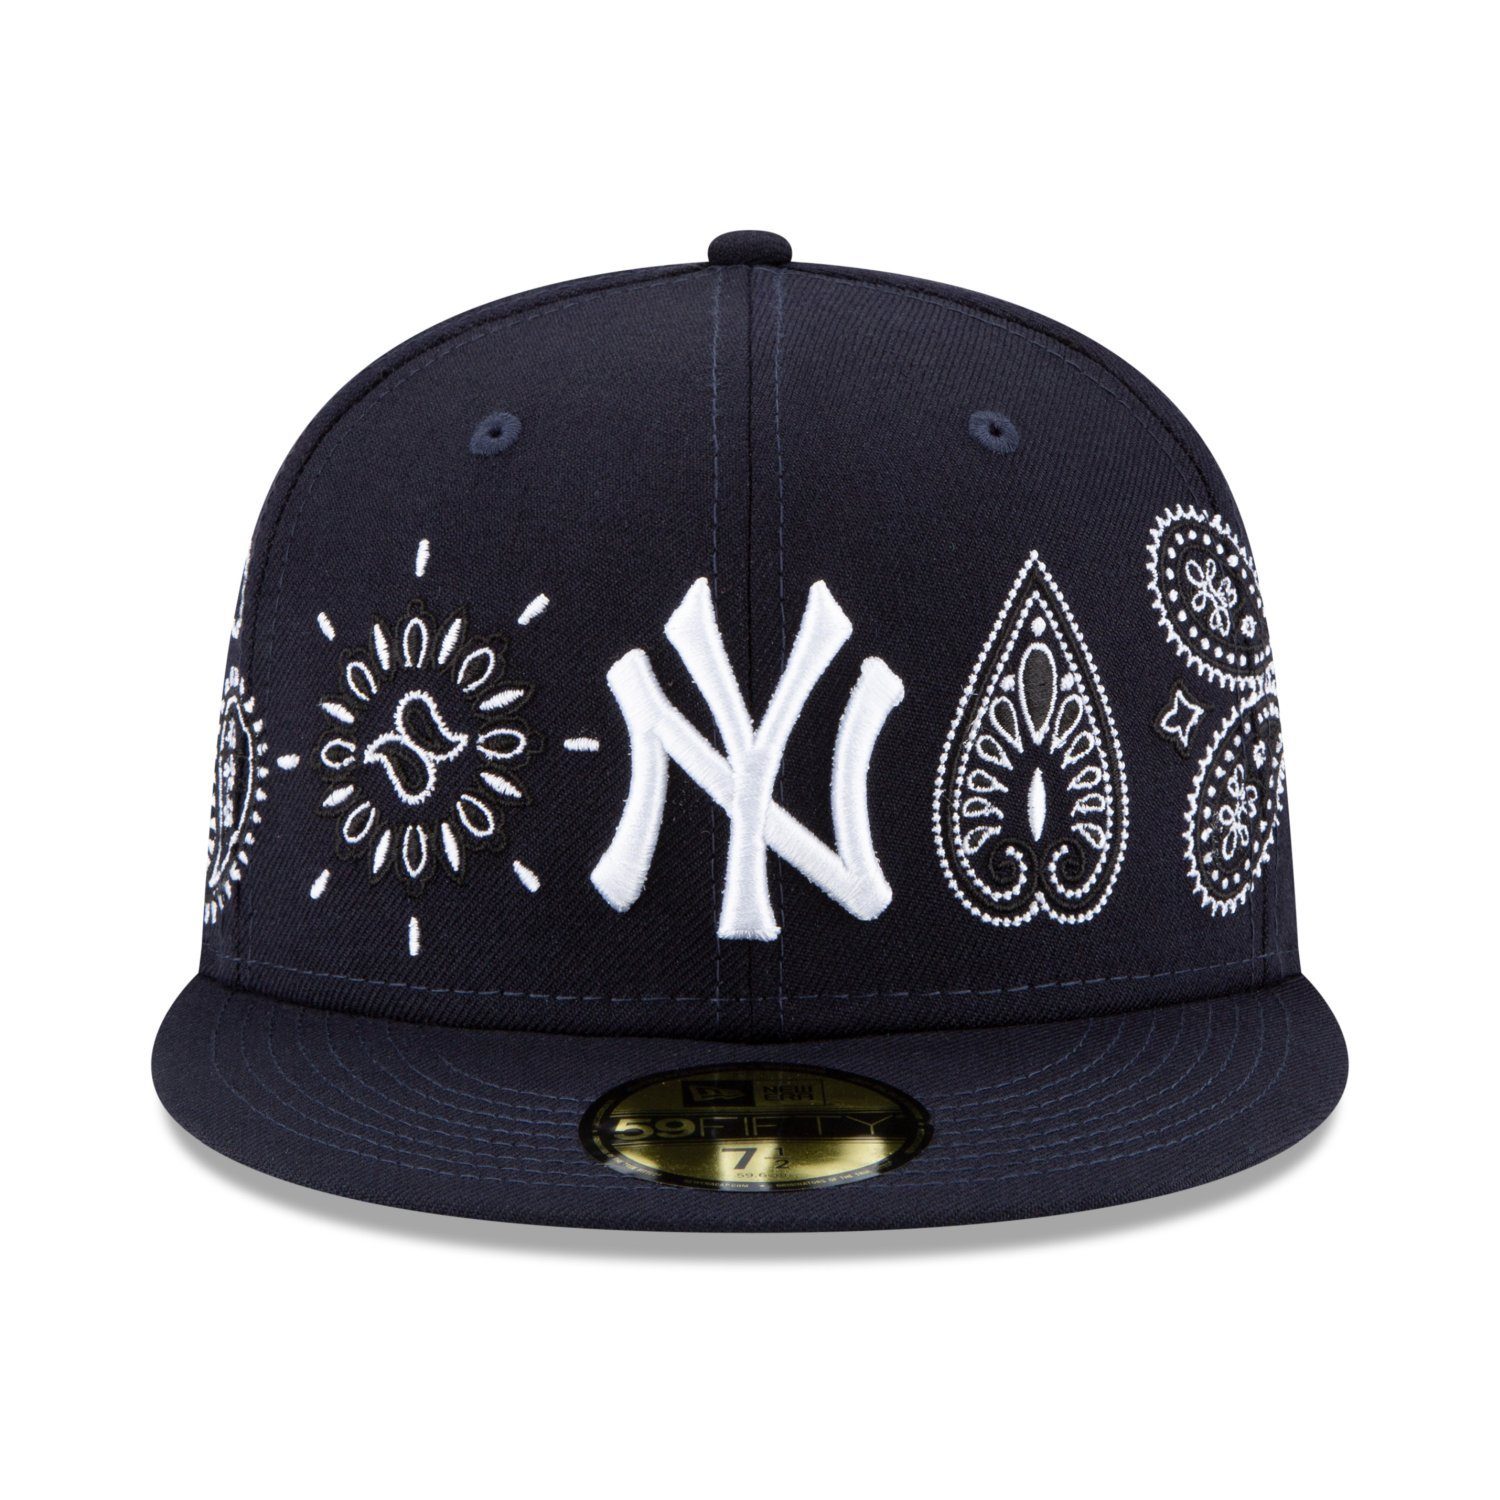 Era Yankees York New PAISLEY Cap New Fitted 59Fifty